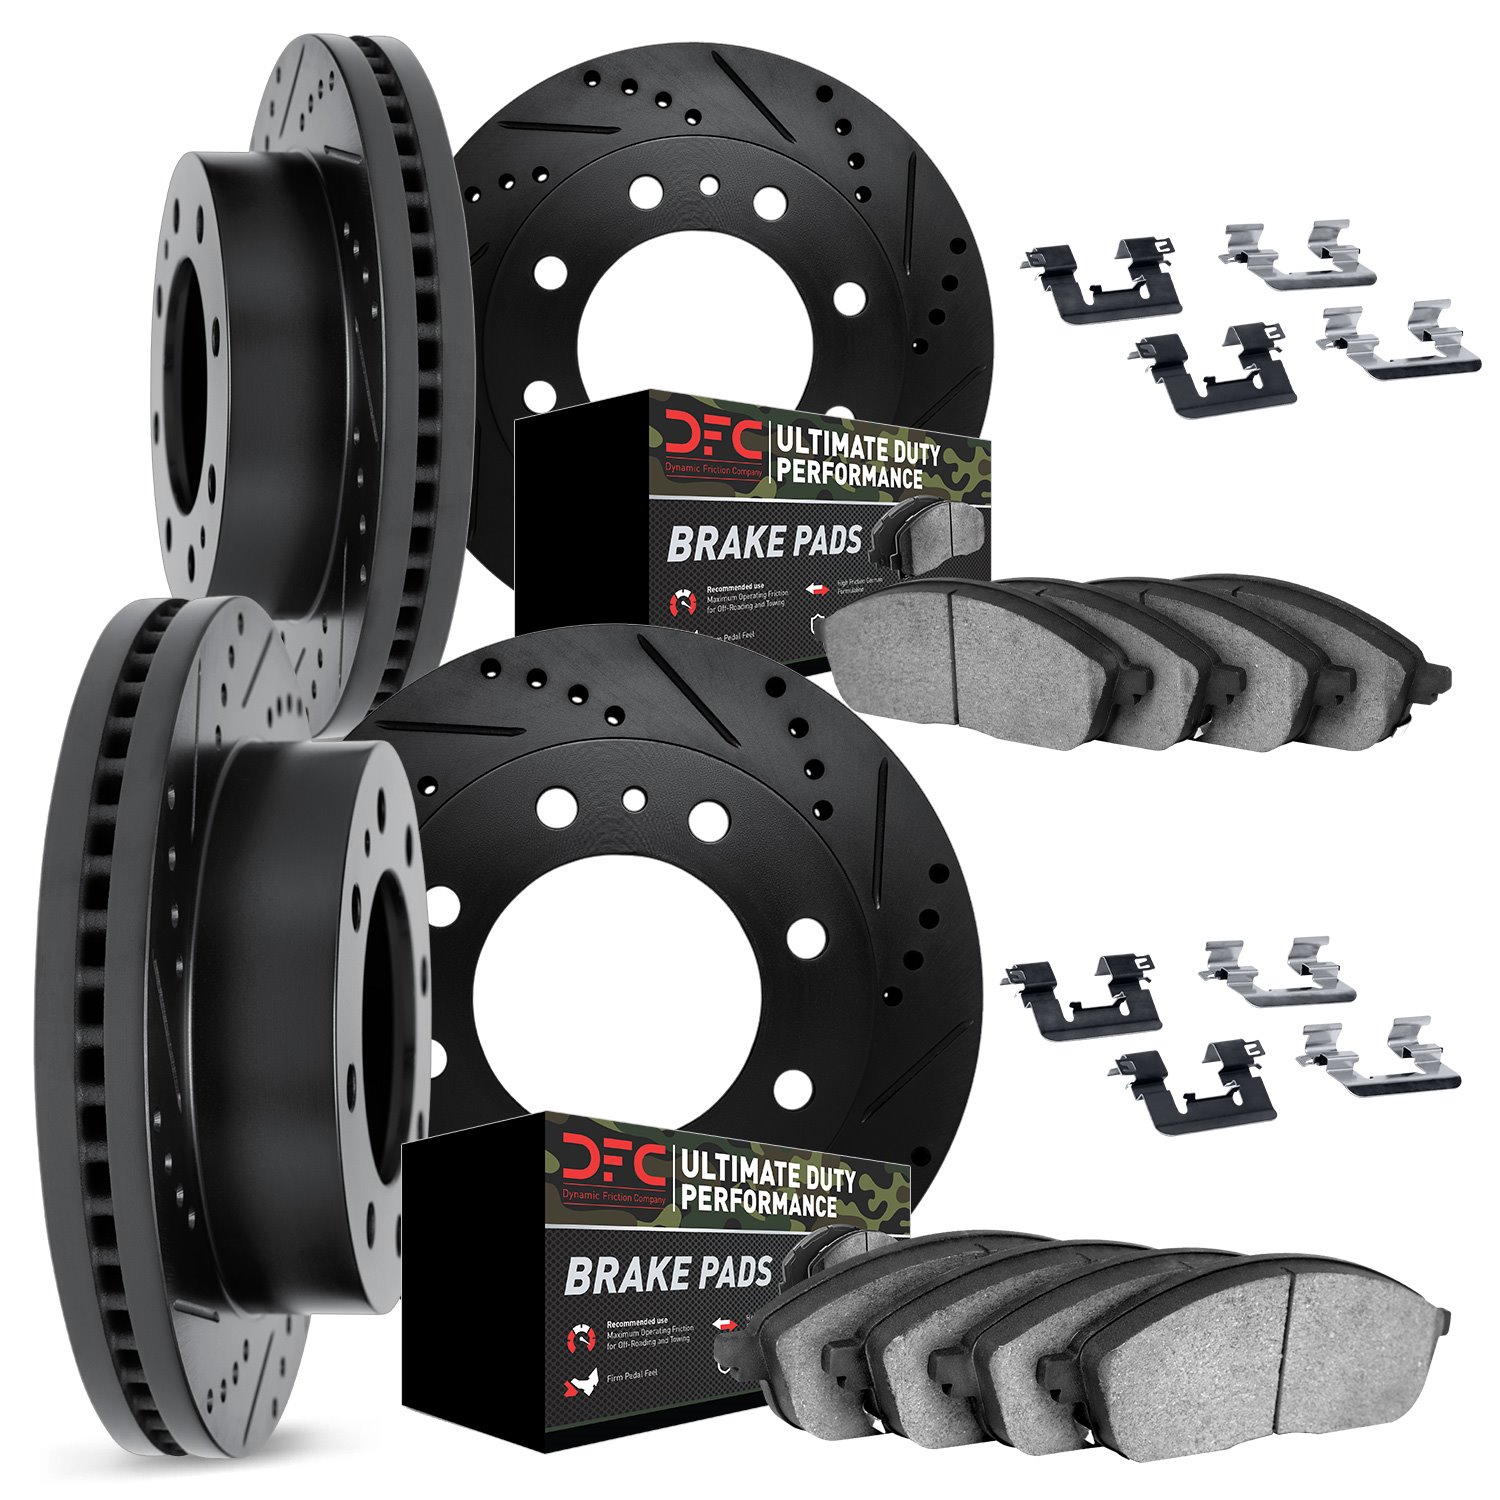 8414-54054 Drilled/Slotted Brake Rotors with Ultimate-Duty Brake Pads Kit & Hardware [Black], Fits Select Ford/Lincoln/Mercury/M